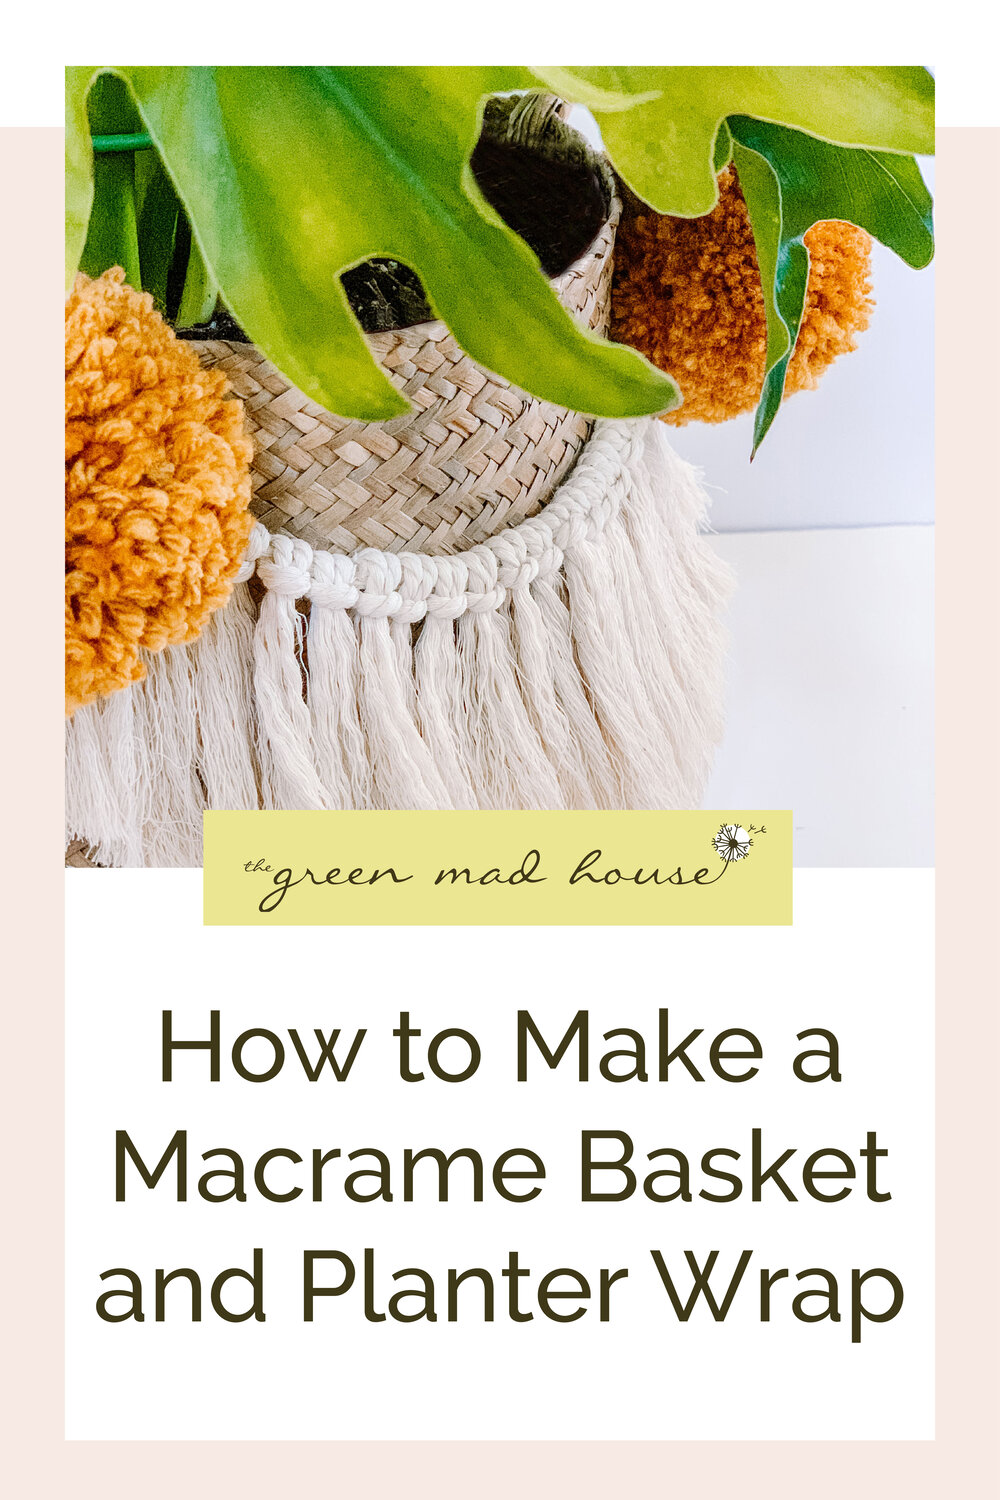 How to Make a Macrame Basket and Planter Wrap — The Green Mad House